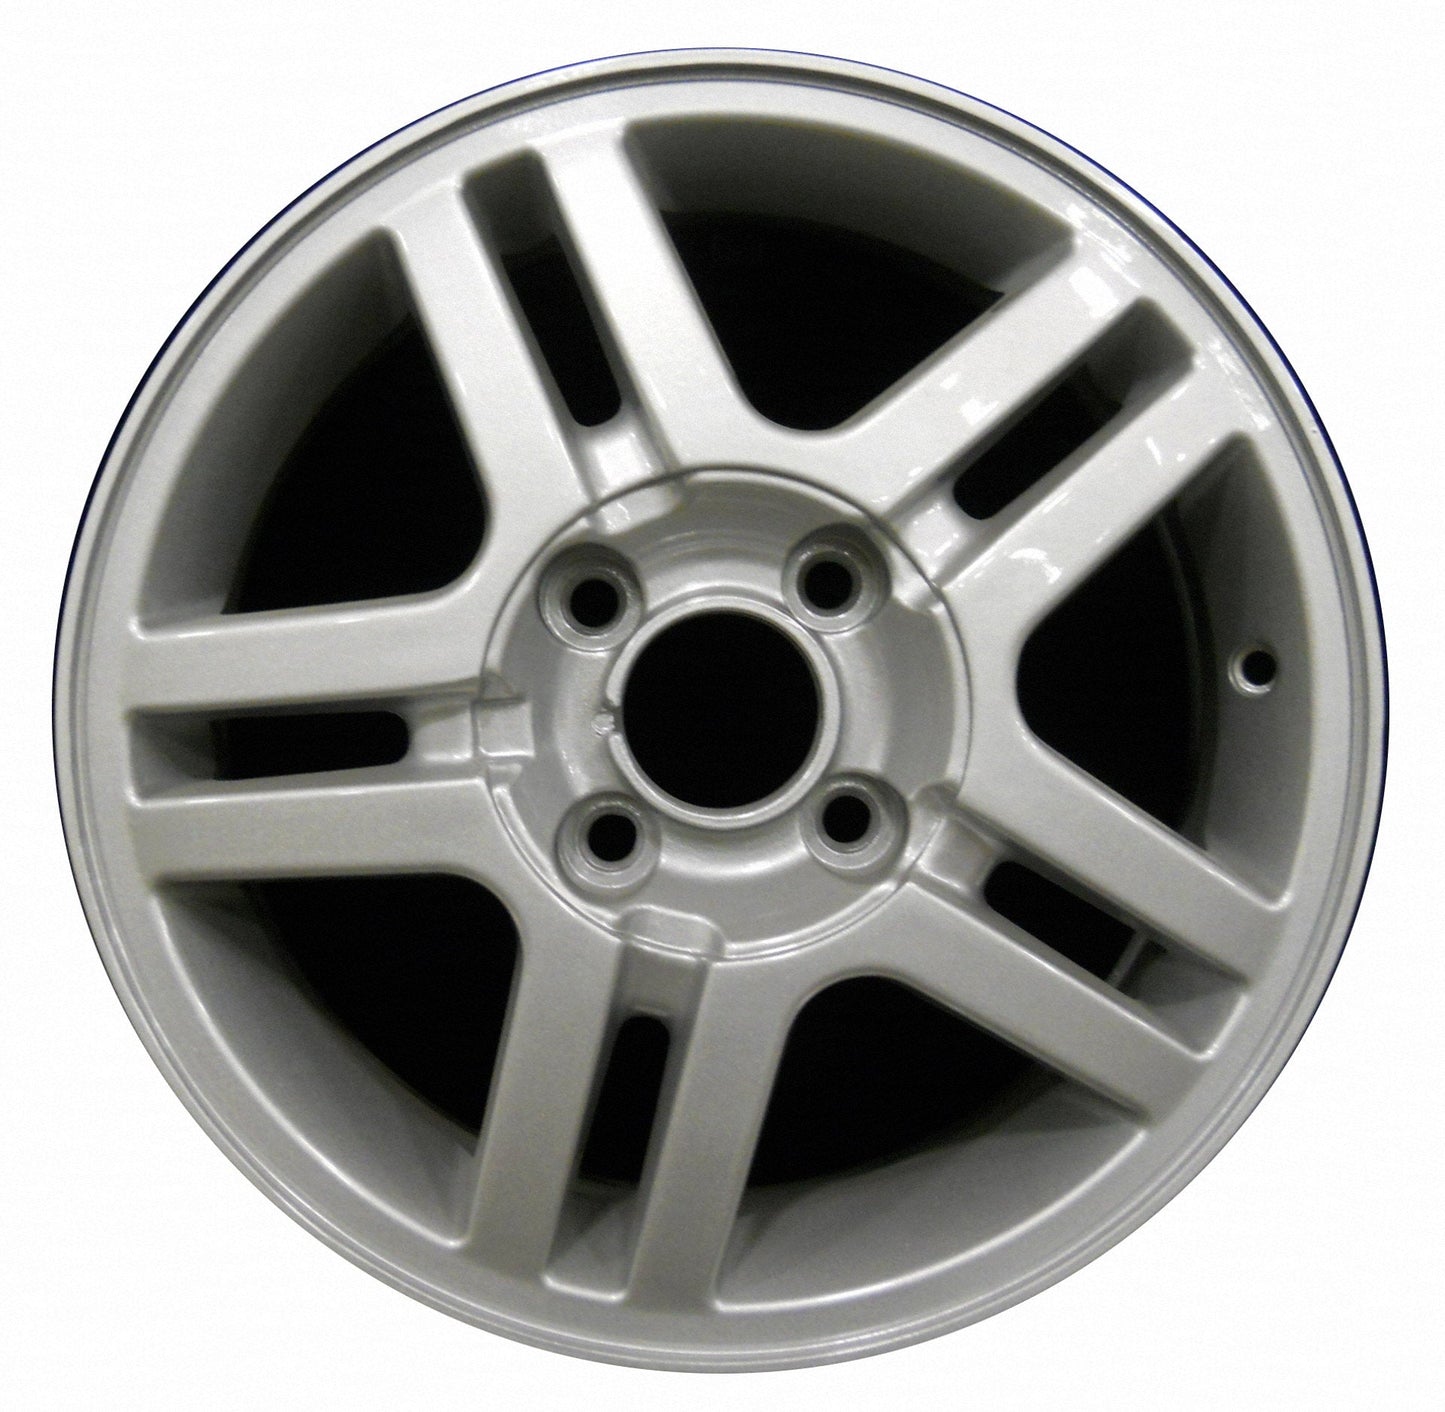 Ford Focus  2000, 2001, 2002, 2003, 2004 Factory OEM Car Wheel Size 15x6 Alloy WAO.3366.PS02.FF